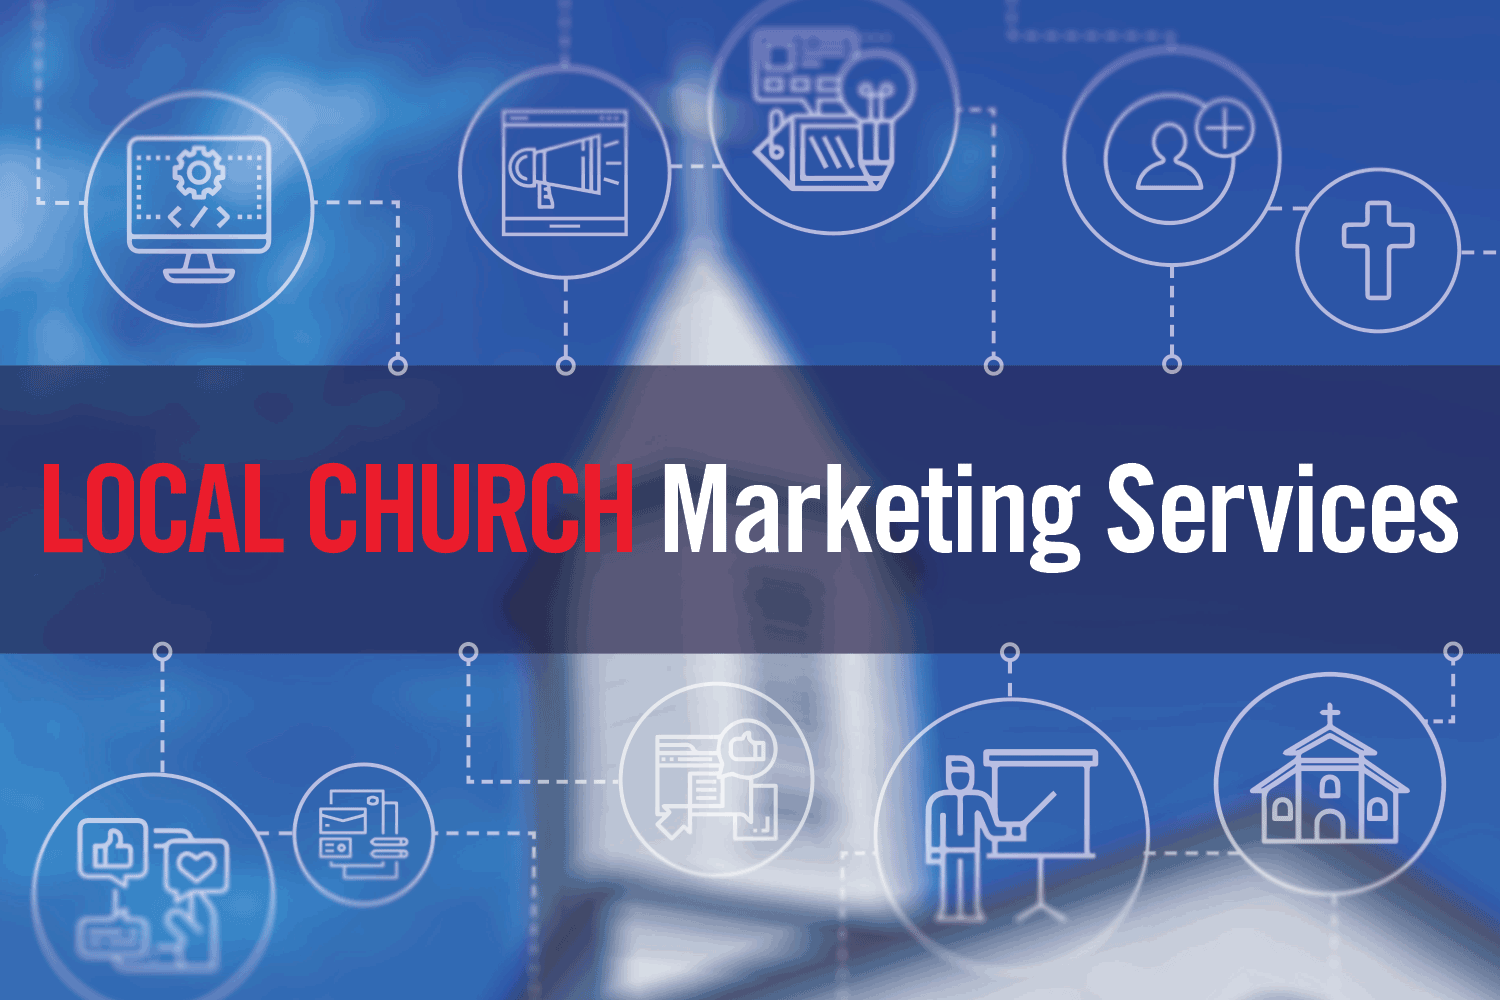 At United Methodist Communications, we provide a menu of marketing services, as well as the training and coaching to help local church pastors and leaders continue to be effective at promoting their church’s mission, events and services to reach new people in new ways.